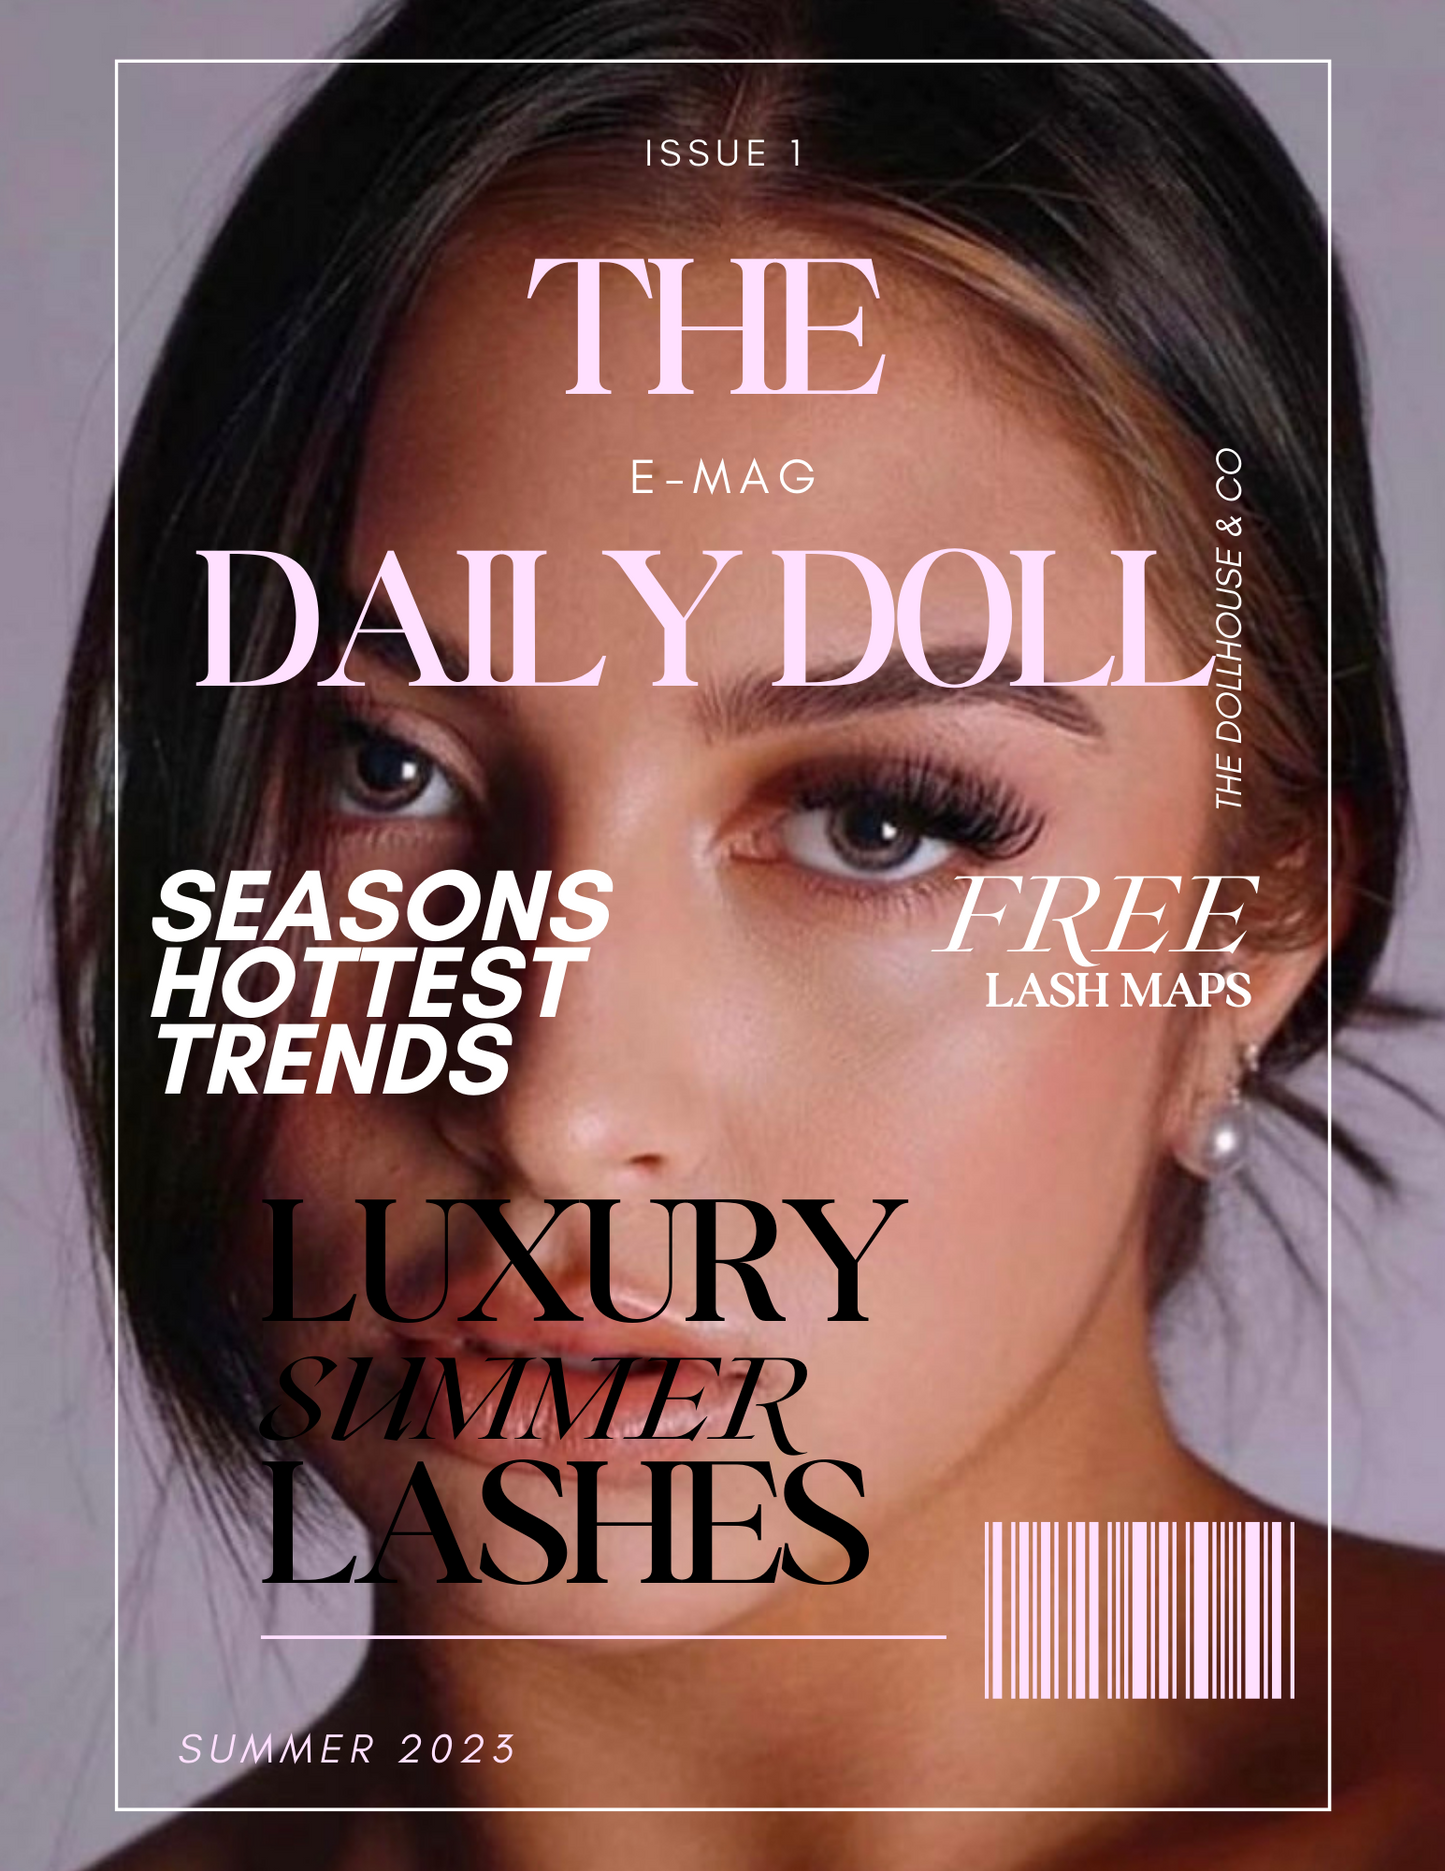 The Daily Doll: Issue 1